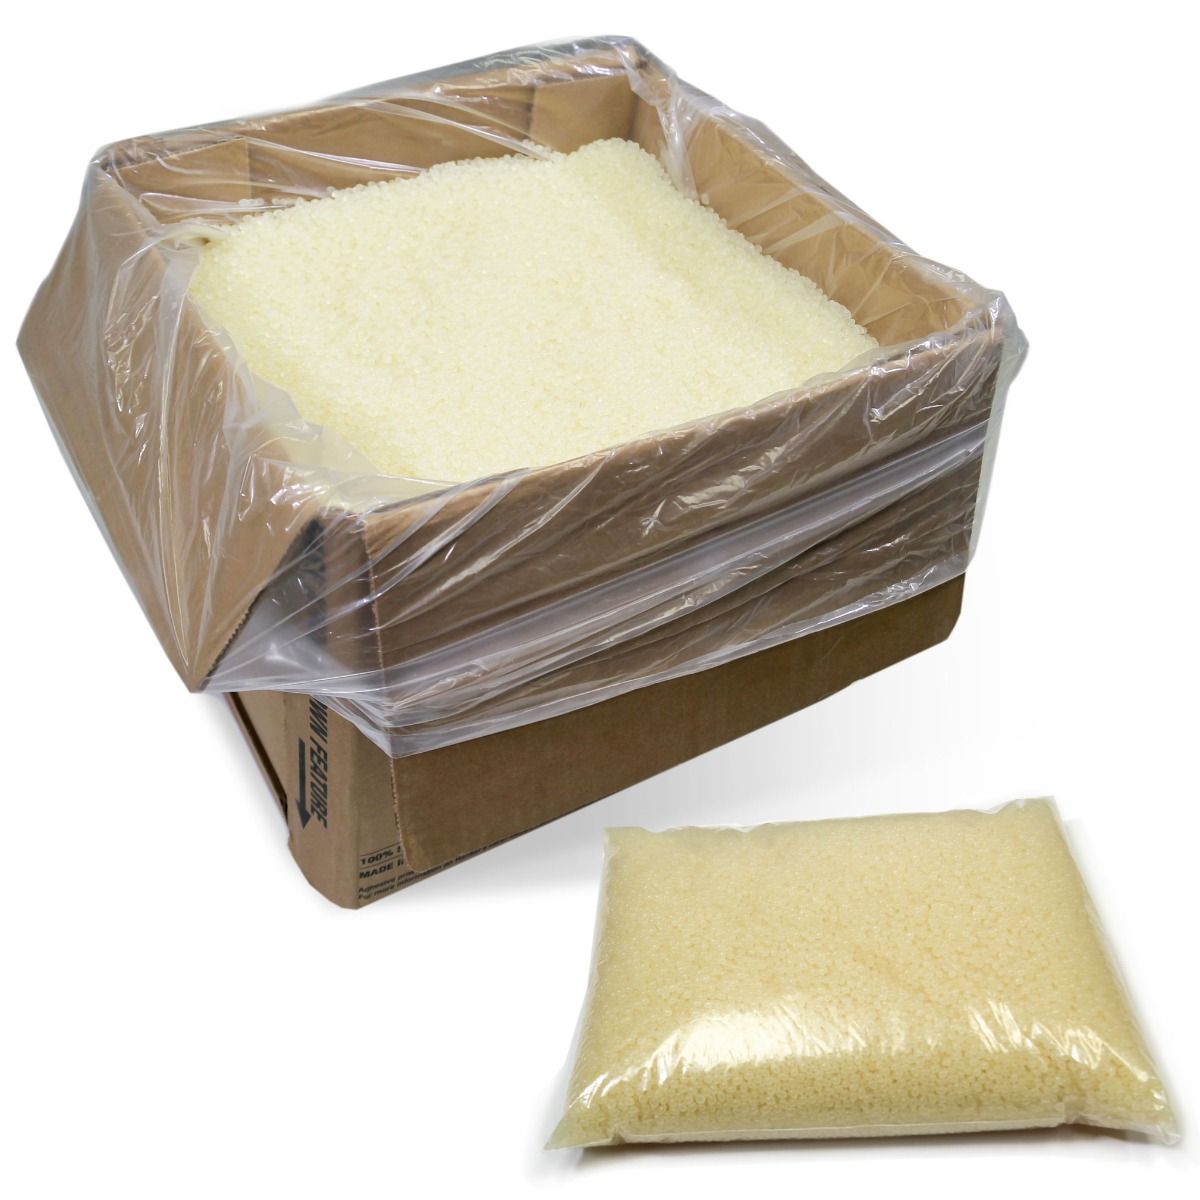 Coverbind Premium Perfect Bind Adhesive, available in 5-pound bag or 30-pound box